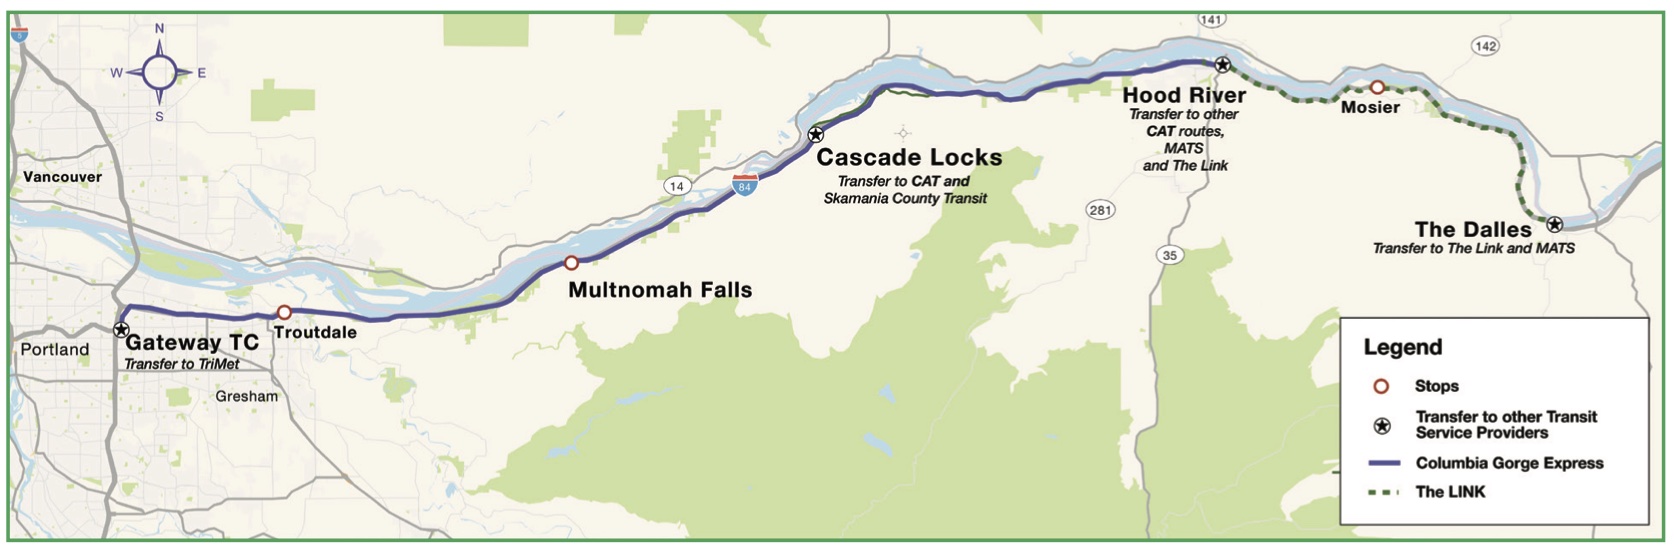 Columbia Gorge Express Route Map